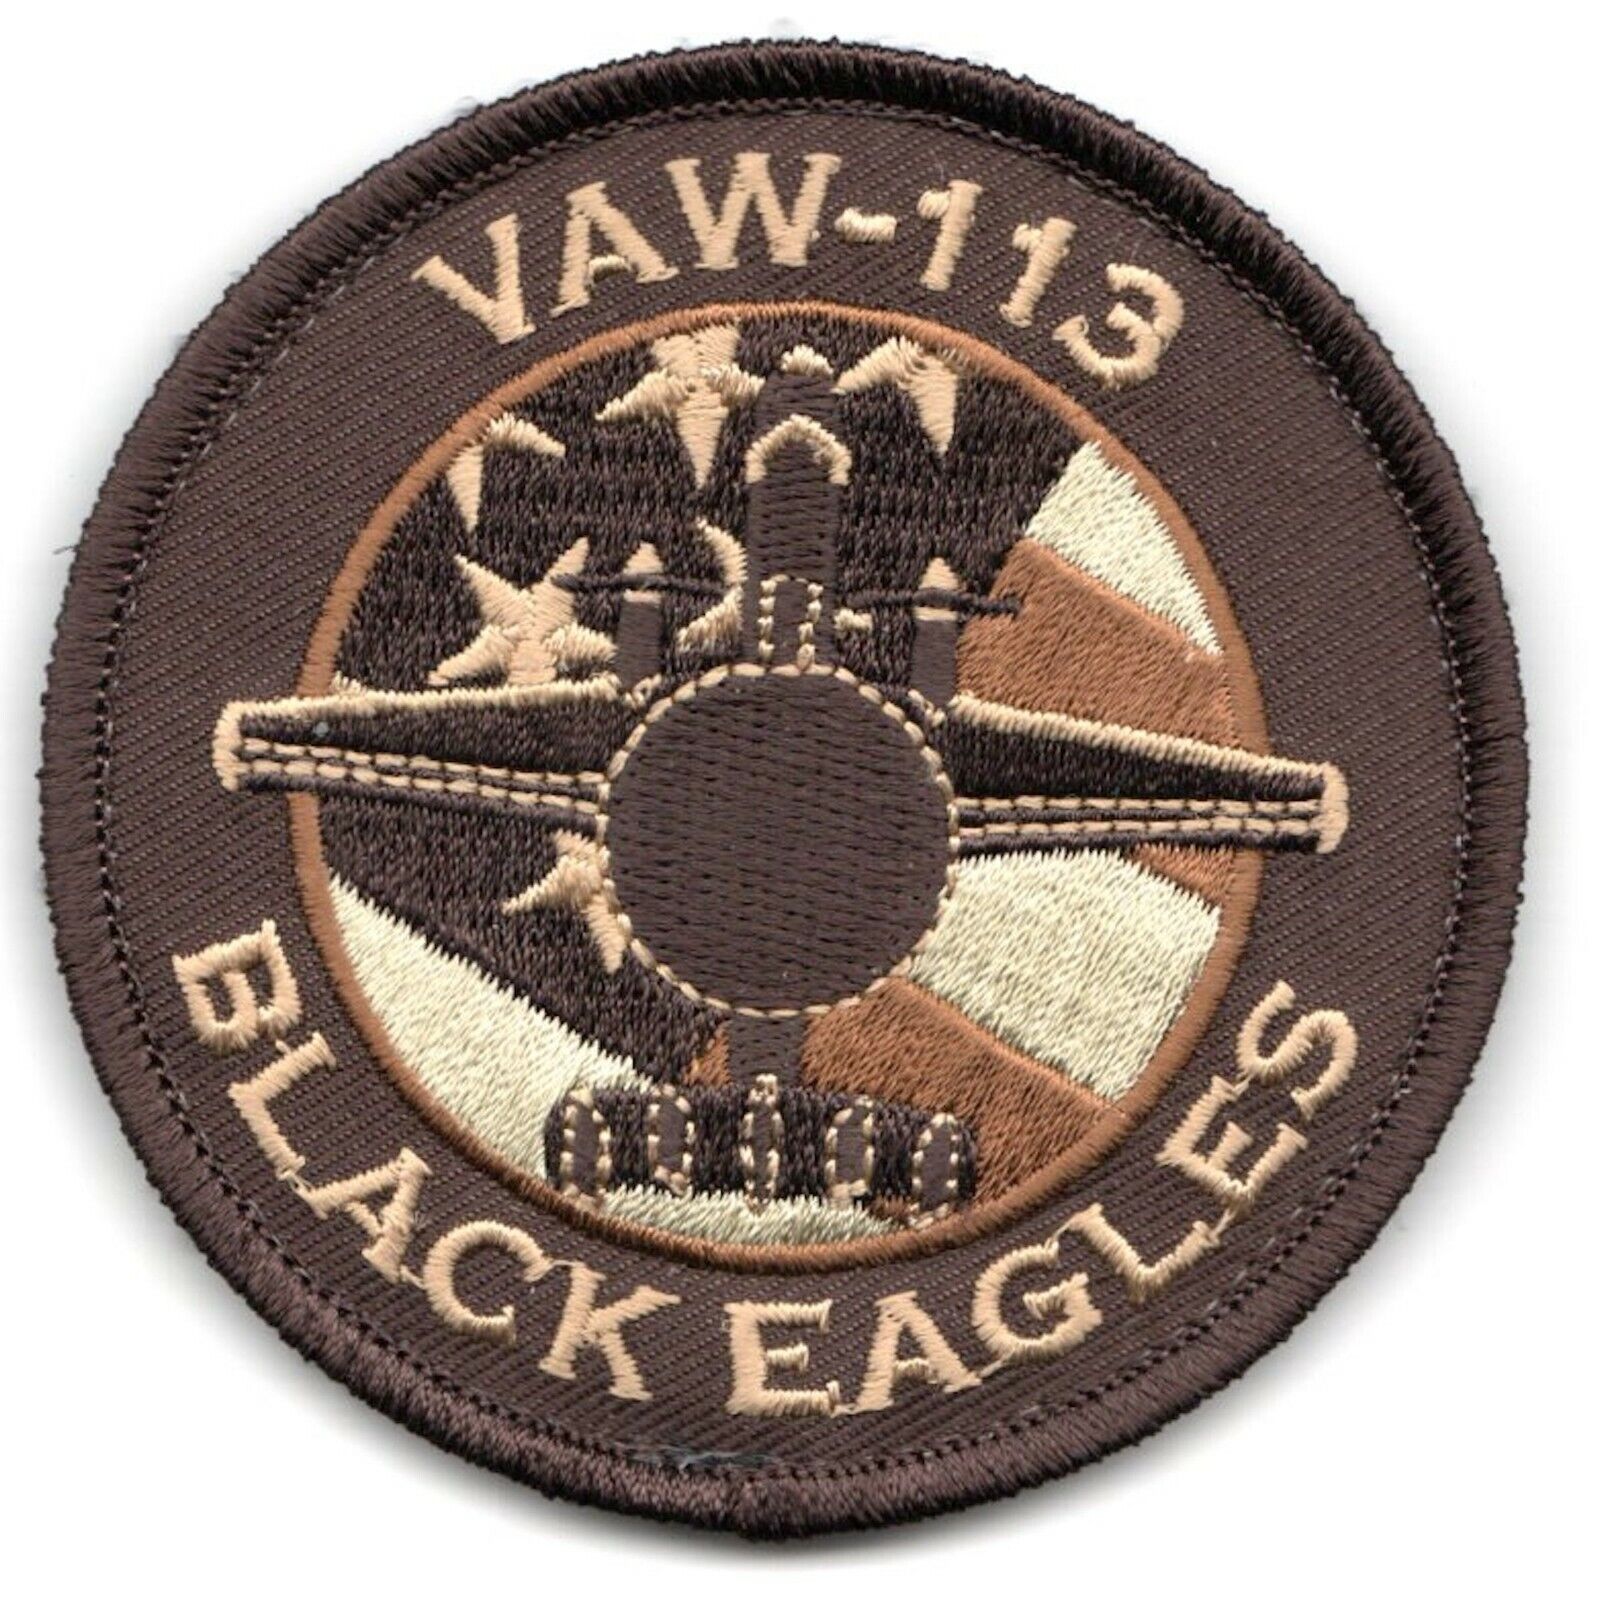 Navy VAW-113 E-2D Bullet Desert USA Round Military Hook Loop Embroidered Patch